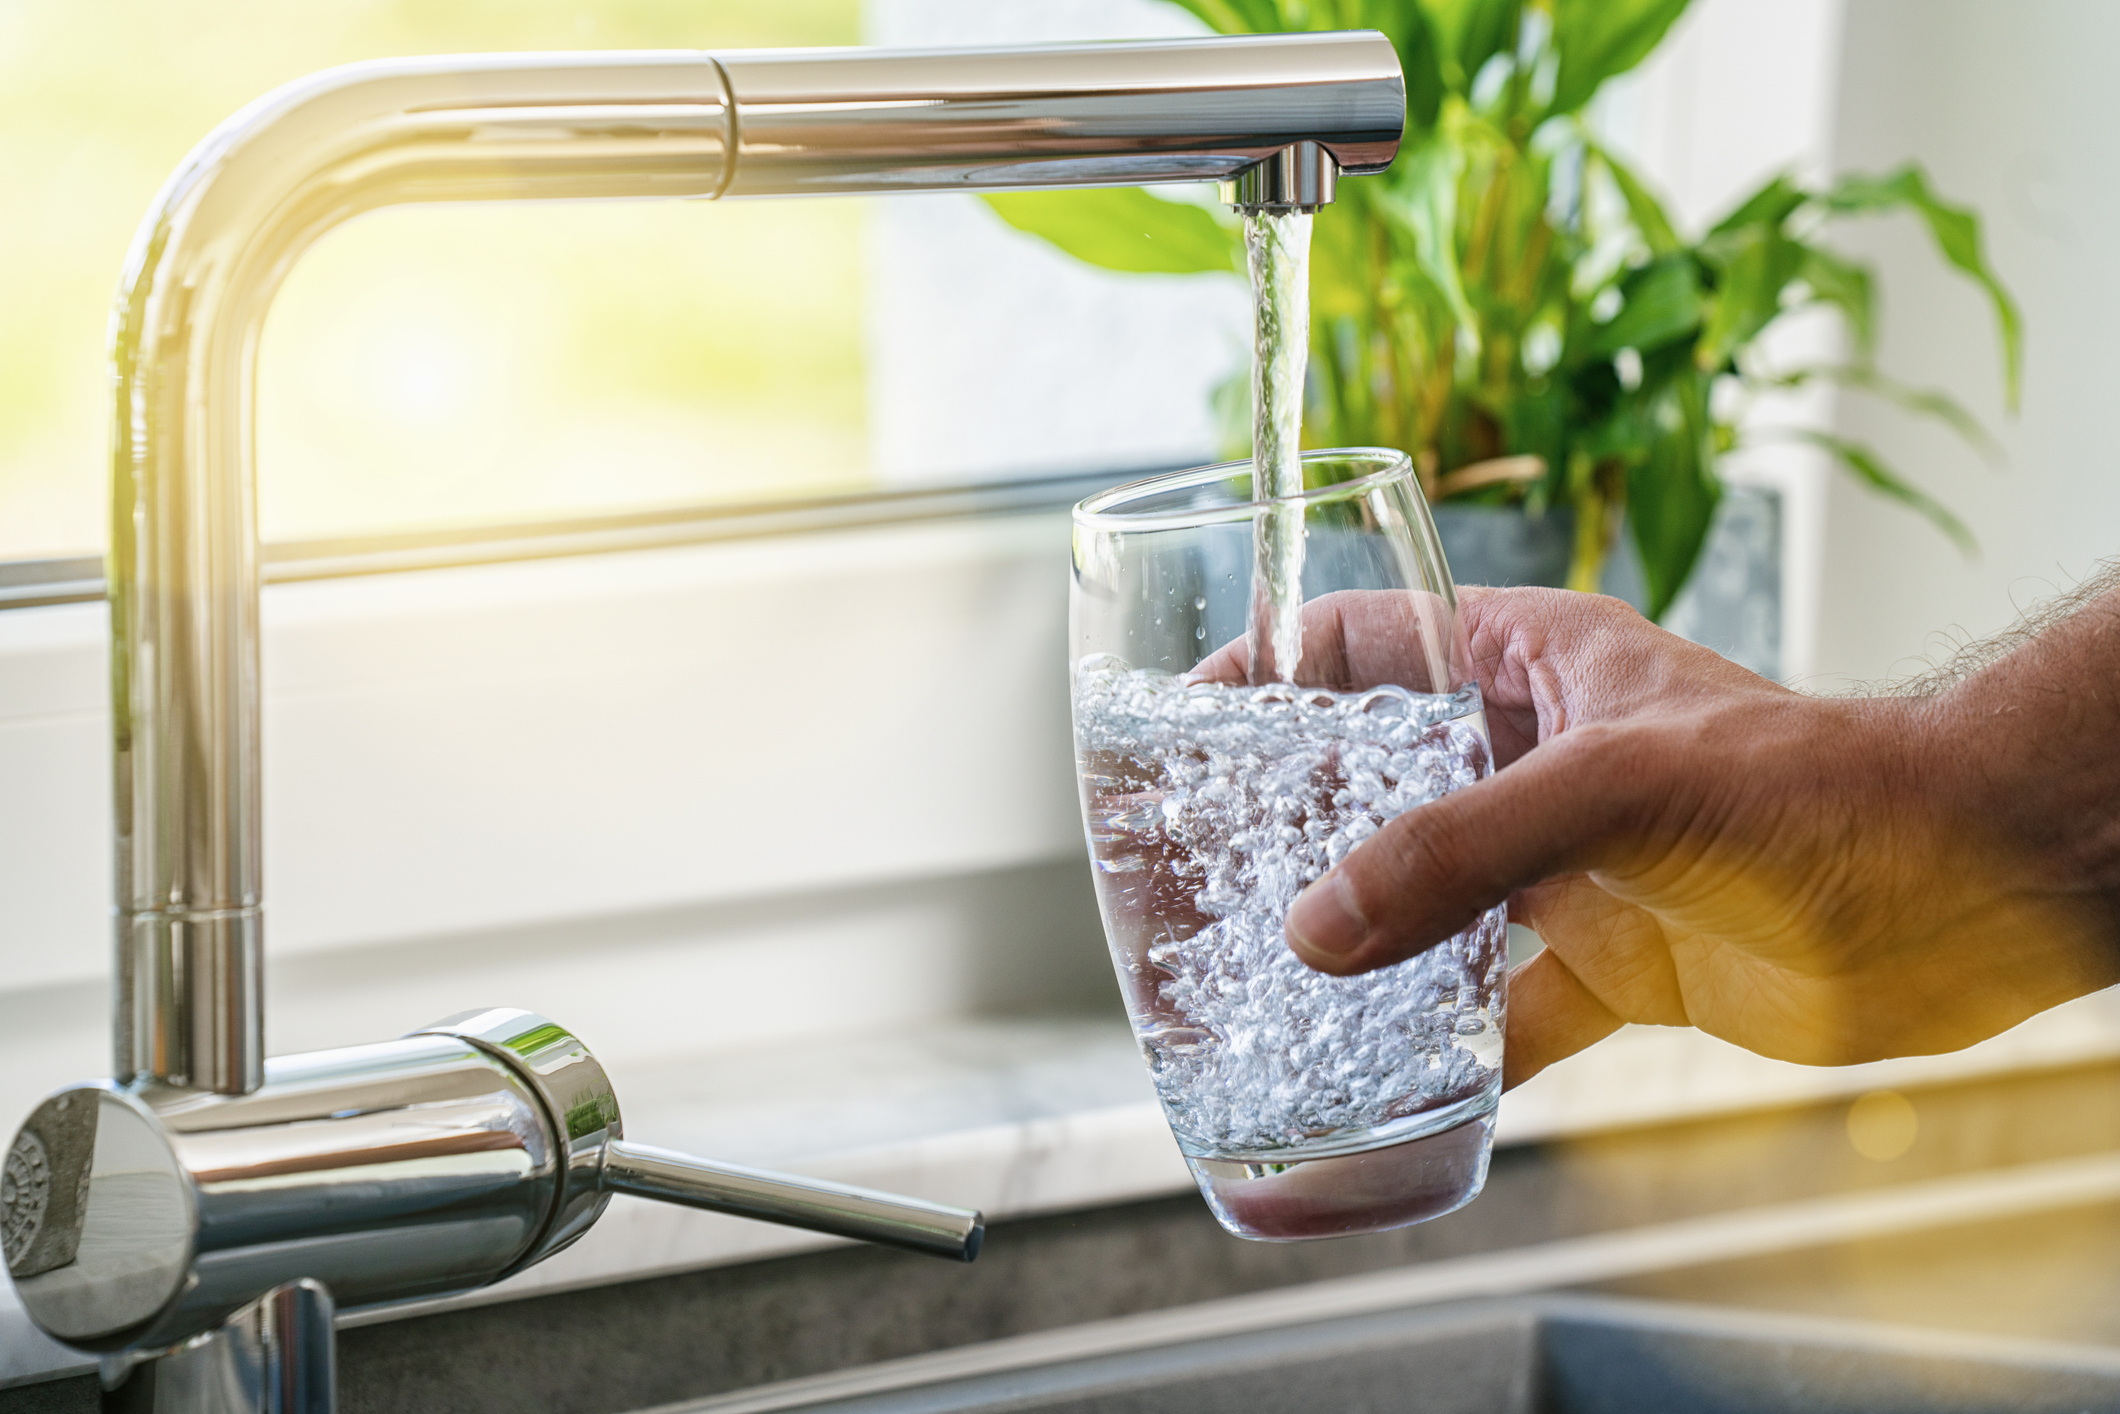 3 places where Americans are exposed to high arsenic in drinking water